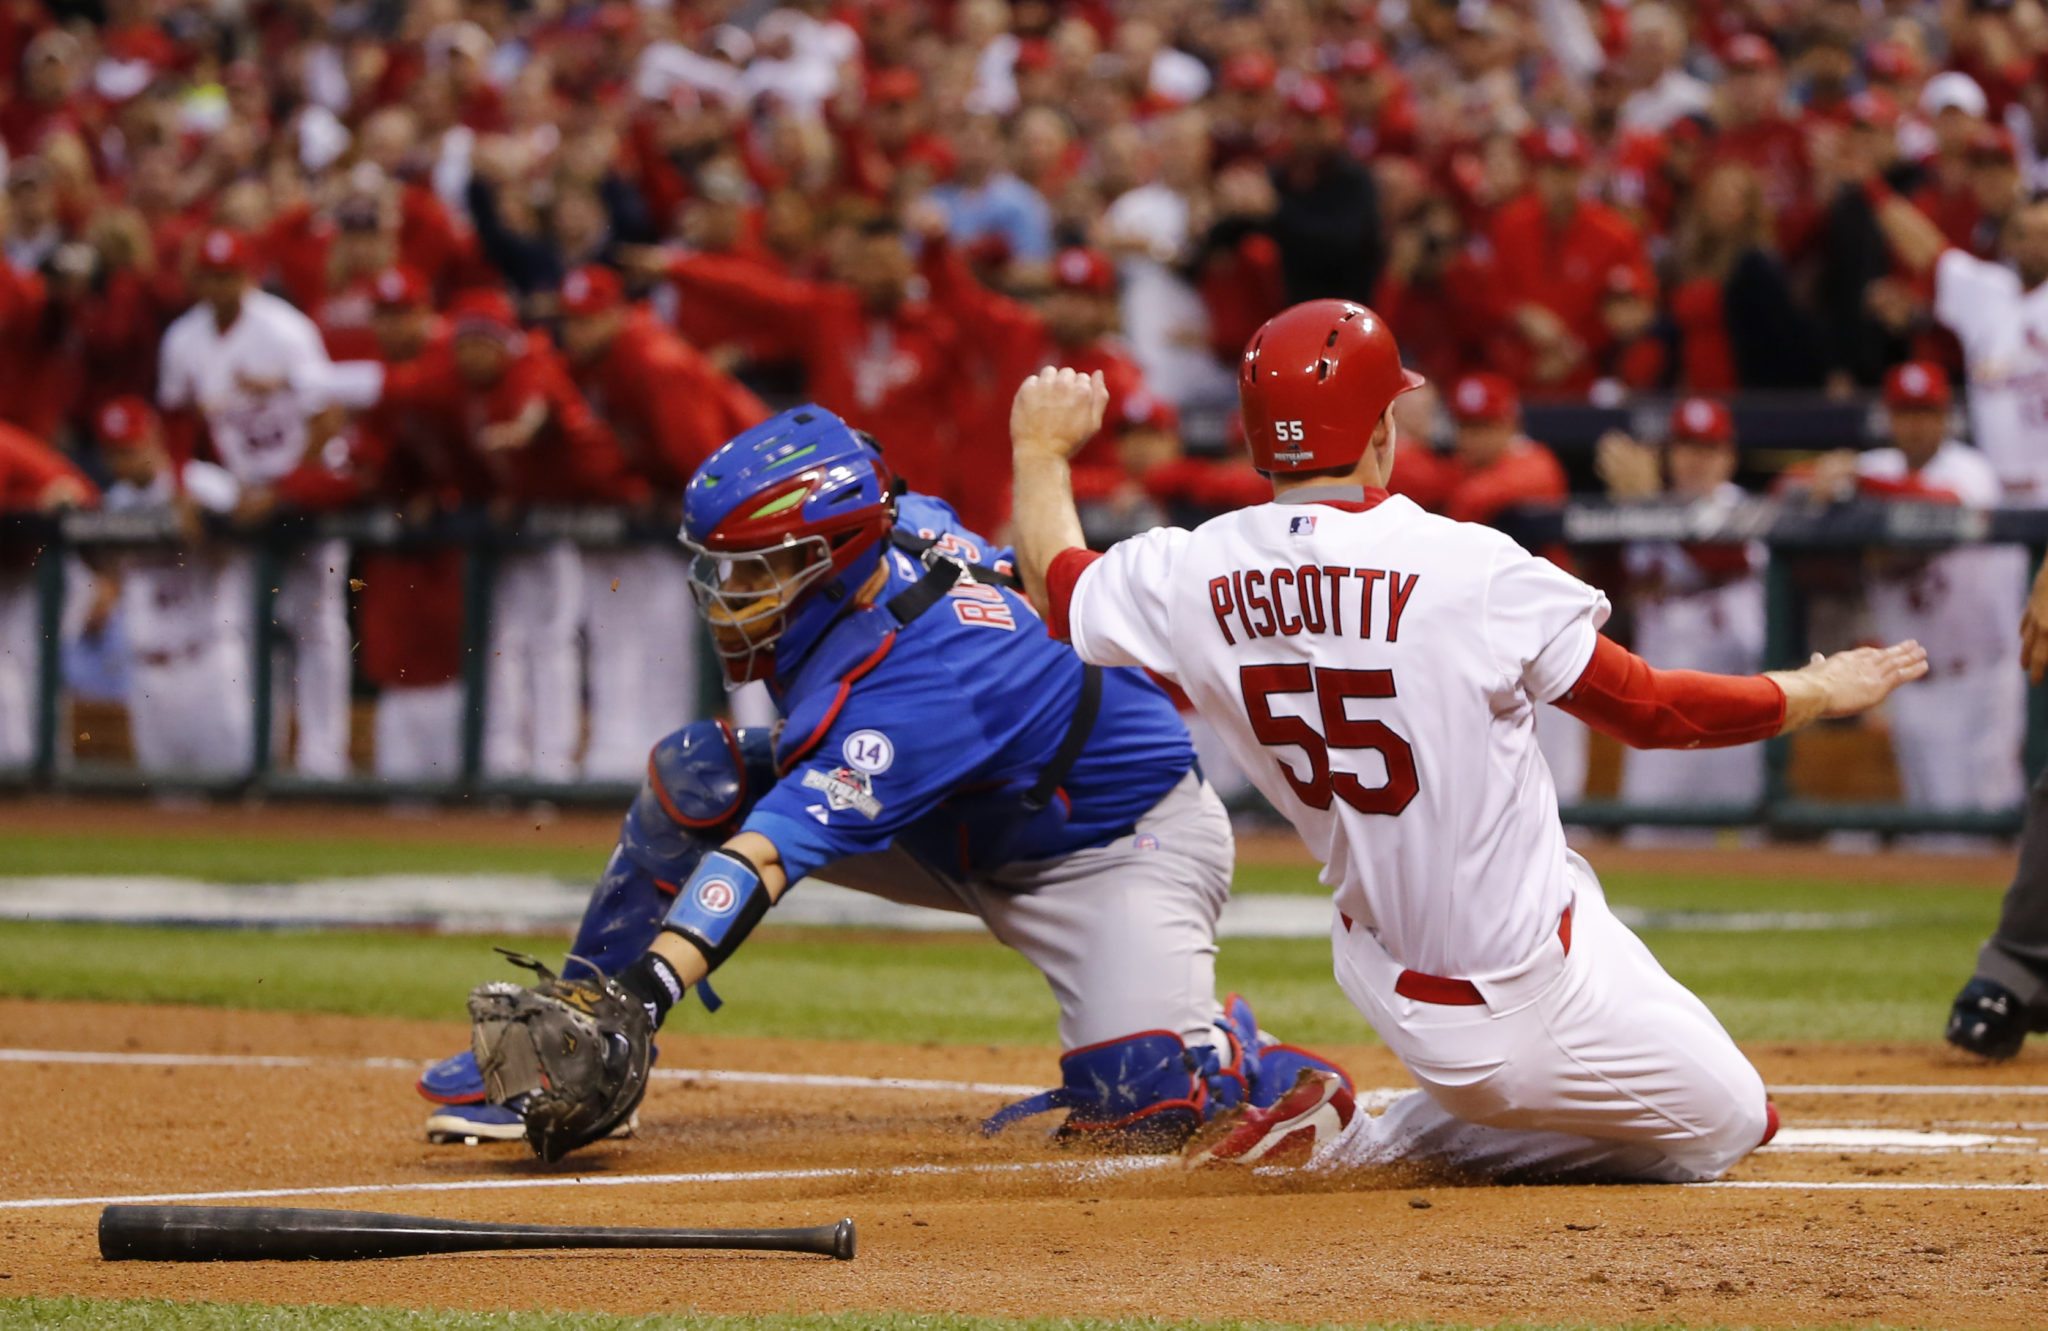 Cardinals, McDonald&#39;s Announce Cards-Cubs &#39;Ticketfest&#39; Promotion | ArchCity.Media